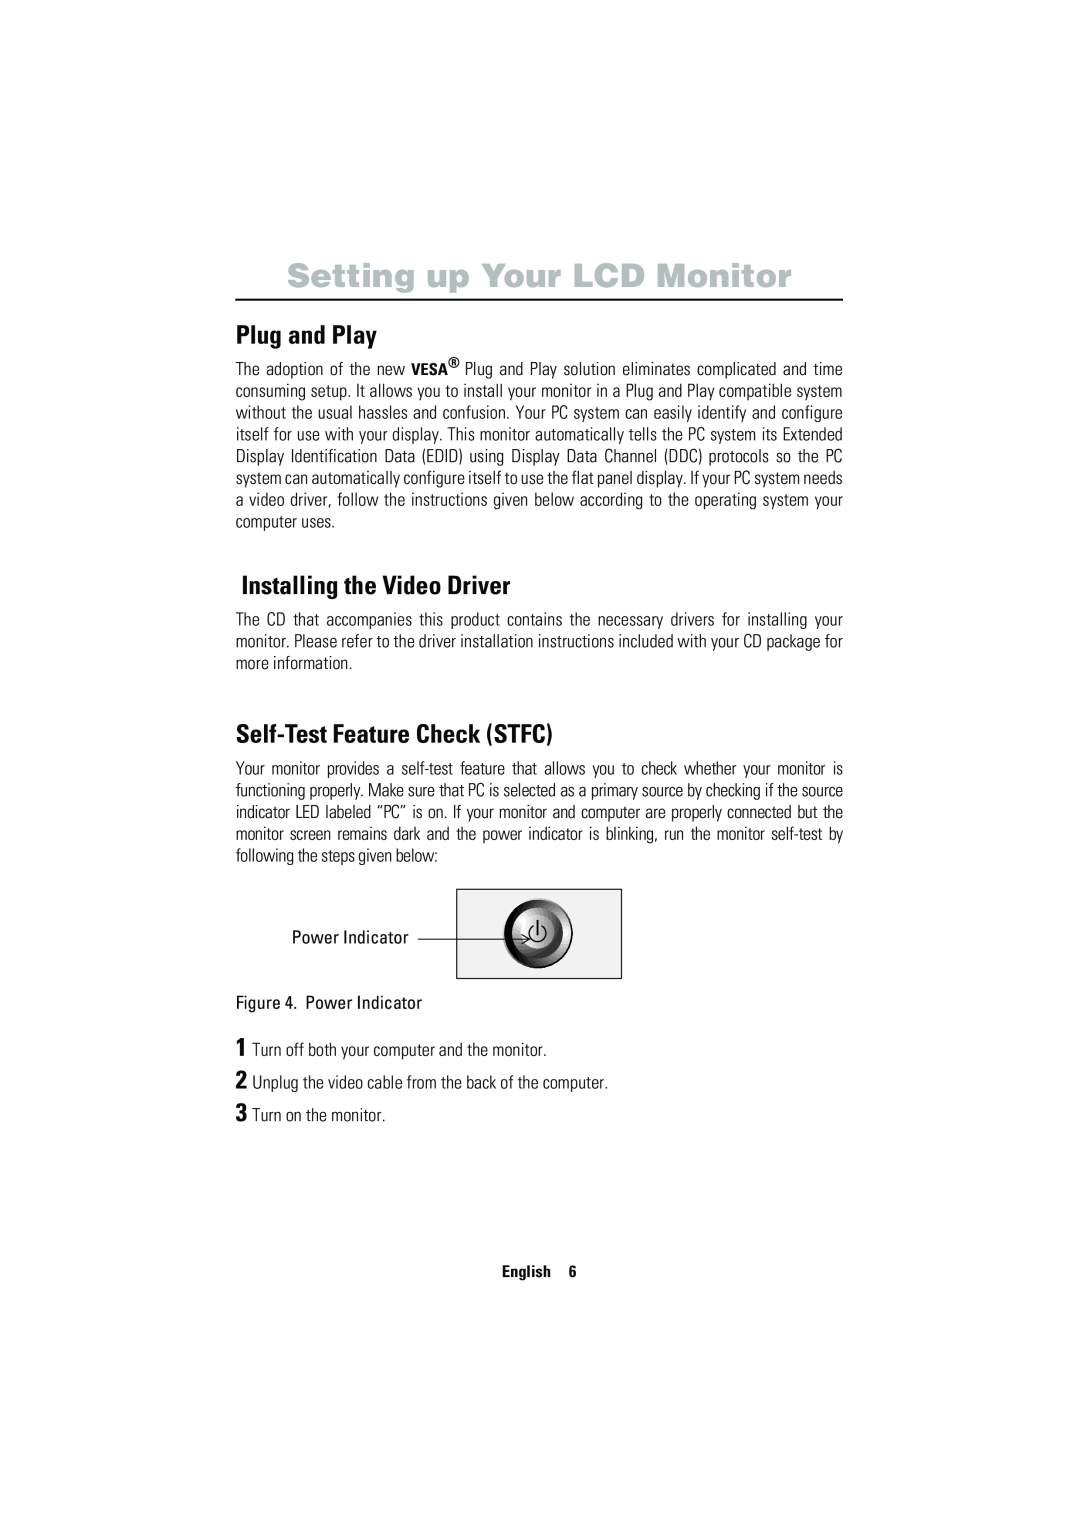 Samsung 150MP manual Setting up Your LCD Monitor, Plug and Play, Installing the Video Driver, Self-Test Feature Check STFC 